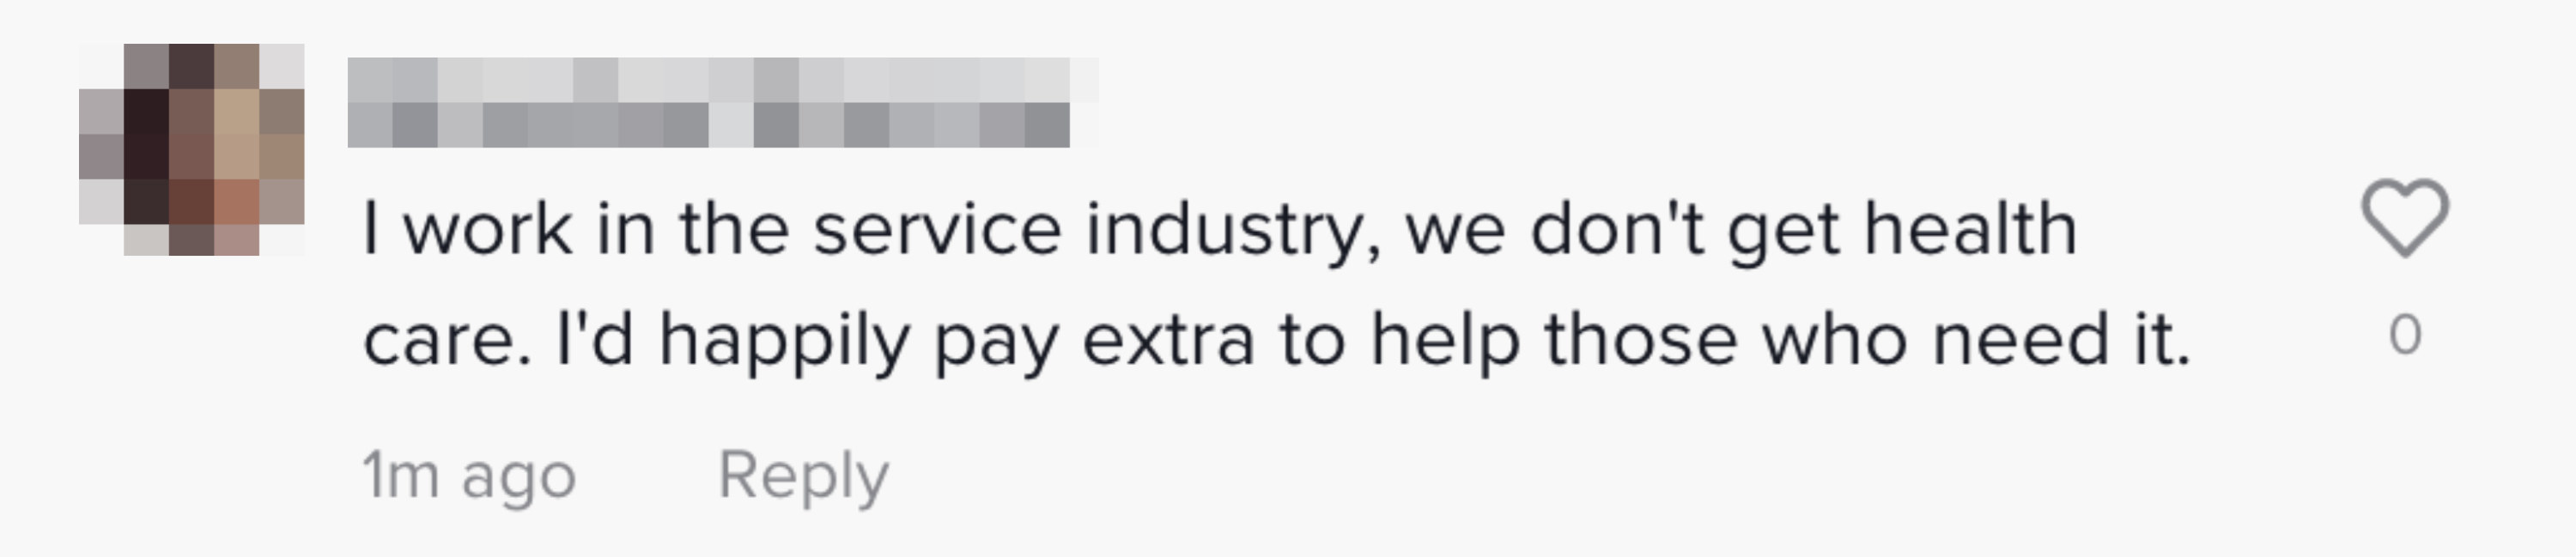 I work in the service industry, we don&#x27;t get health care; I&#x27;d happily pay extra to help those who need it